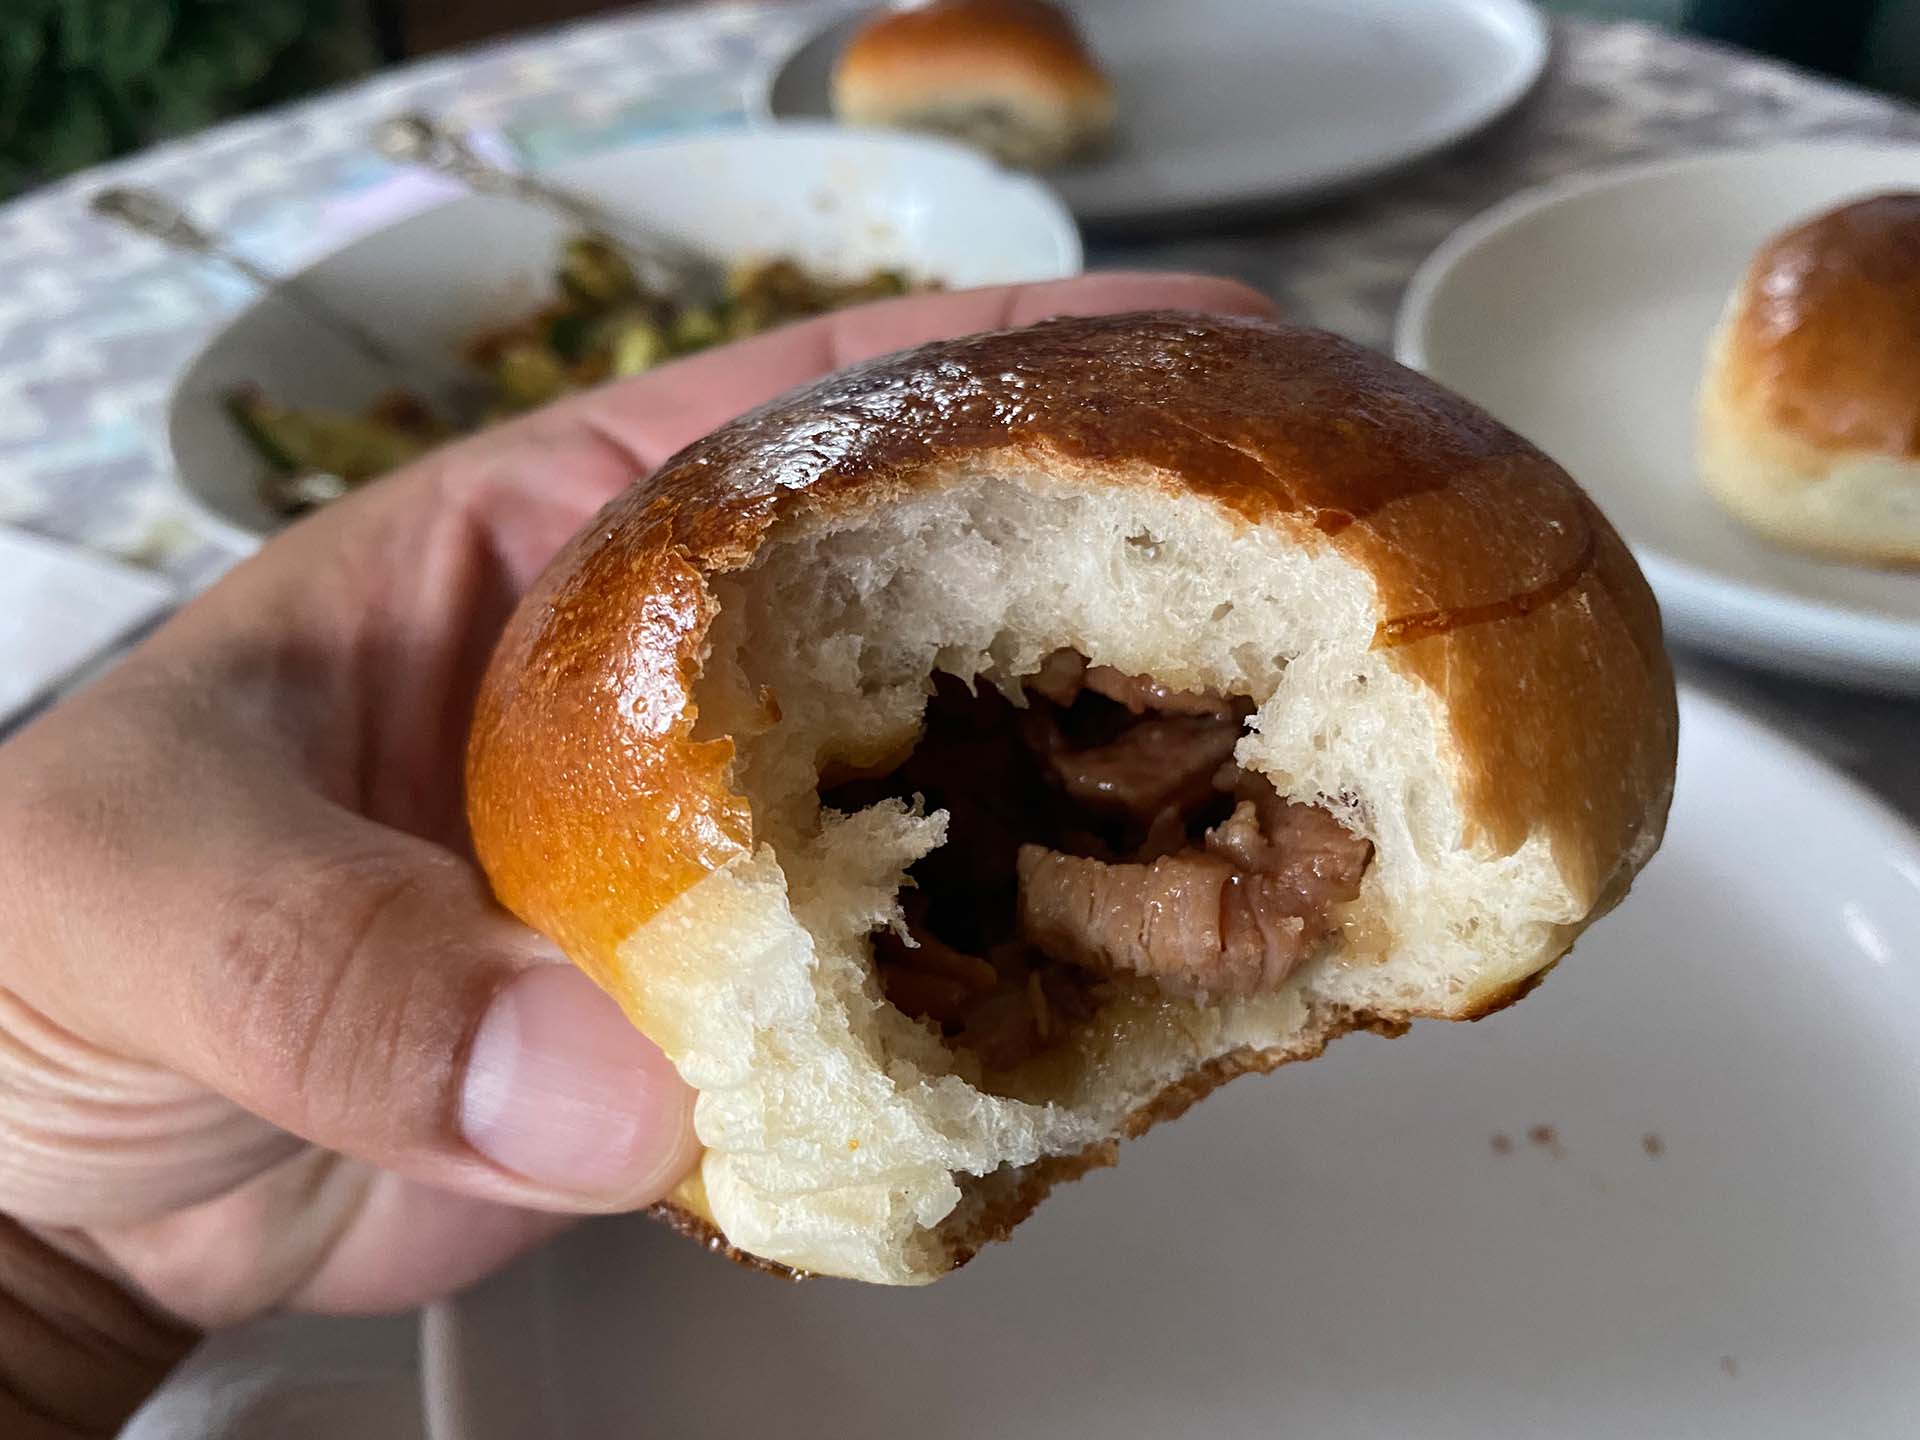 A Chinese barbecue pork bun with a big bite taken out of it so that the meaty filling inside is visible.